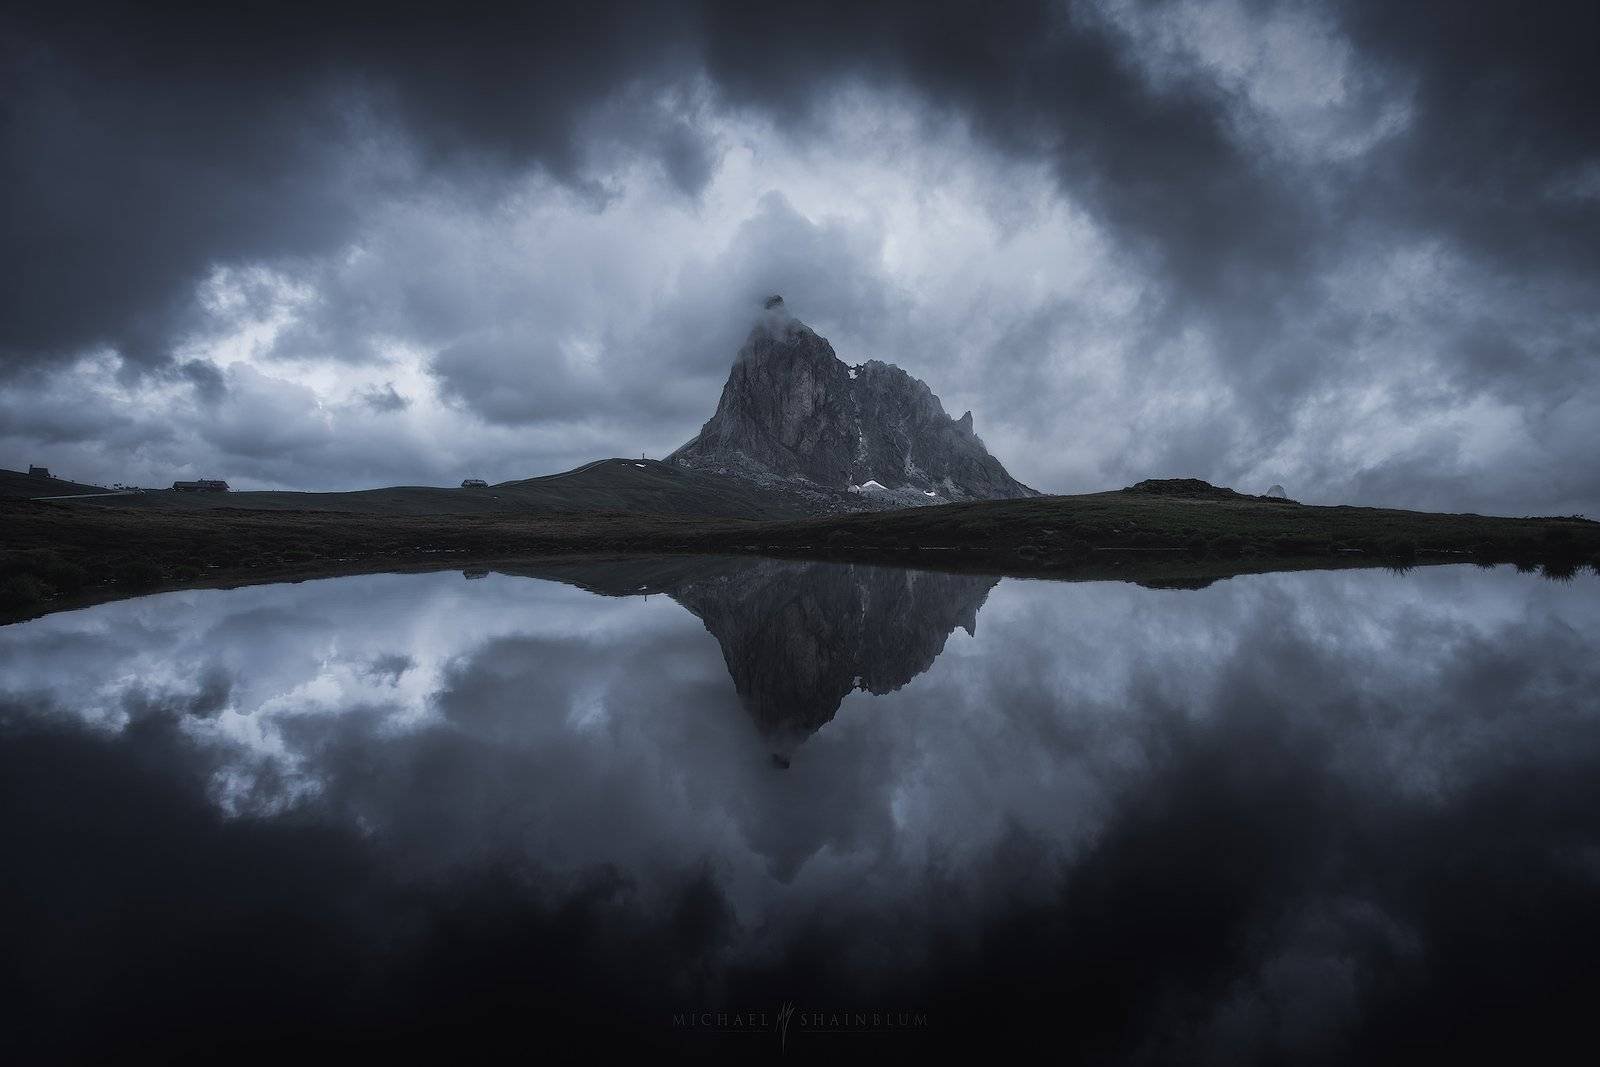 Landscape photography in the Dolomites. Stormy mountain, Passo Giau.